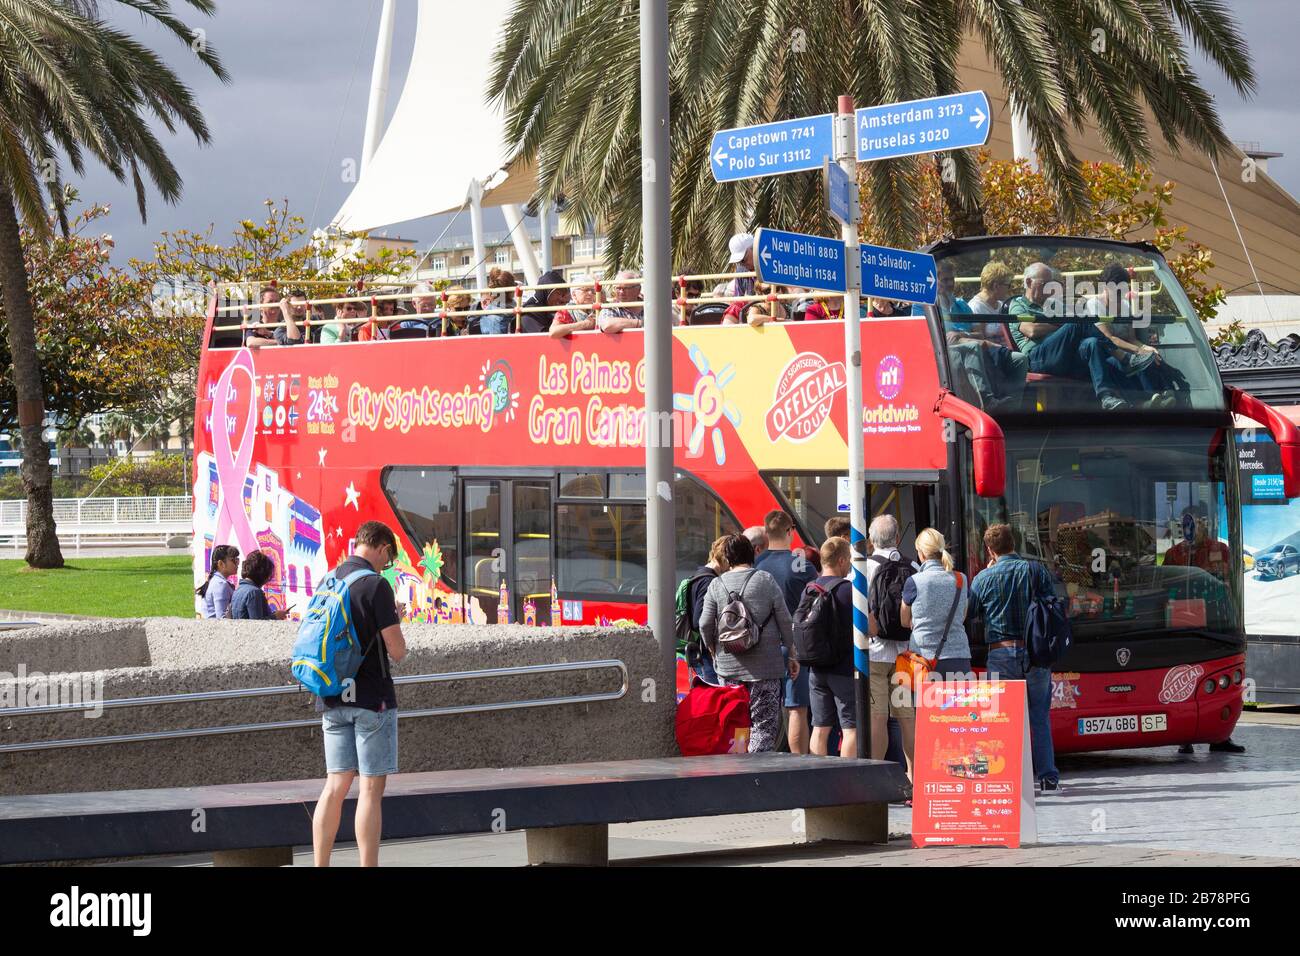 Las Palmas, Gran Canaria, Canary Islands, Spain. 14th March 2020. Tourists,  many from the UK, on sightseeing bus in Las Palmas on Gran Canaria shortly  before the Spanish government announces that the